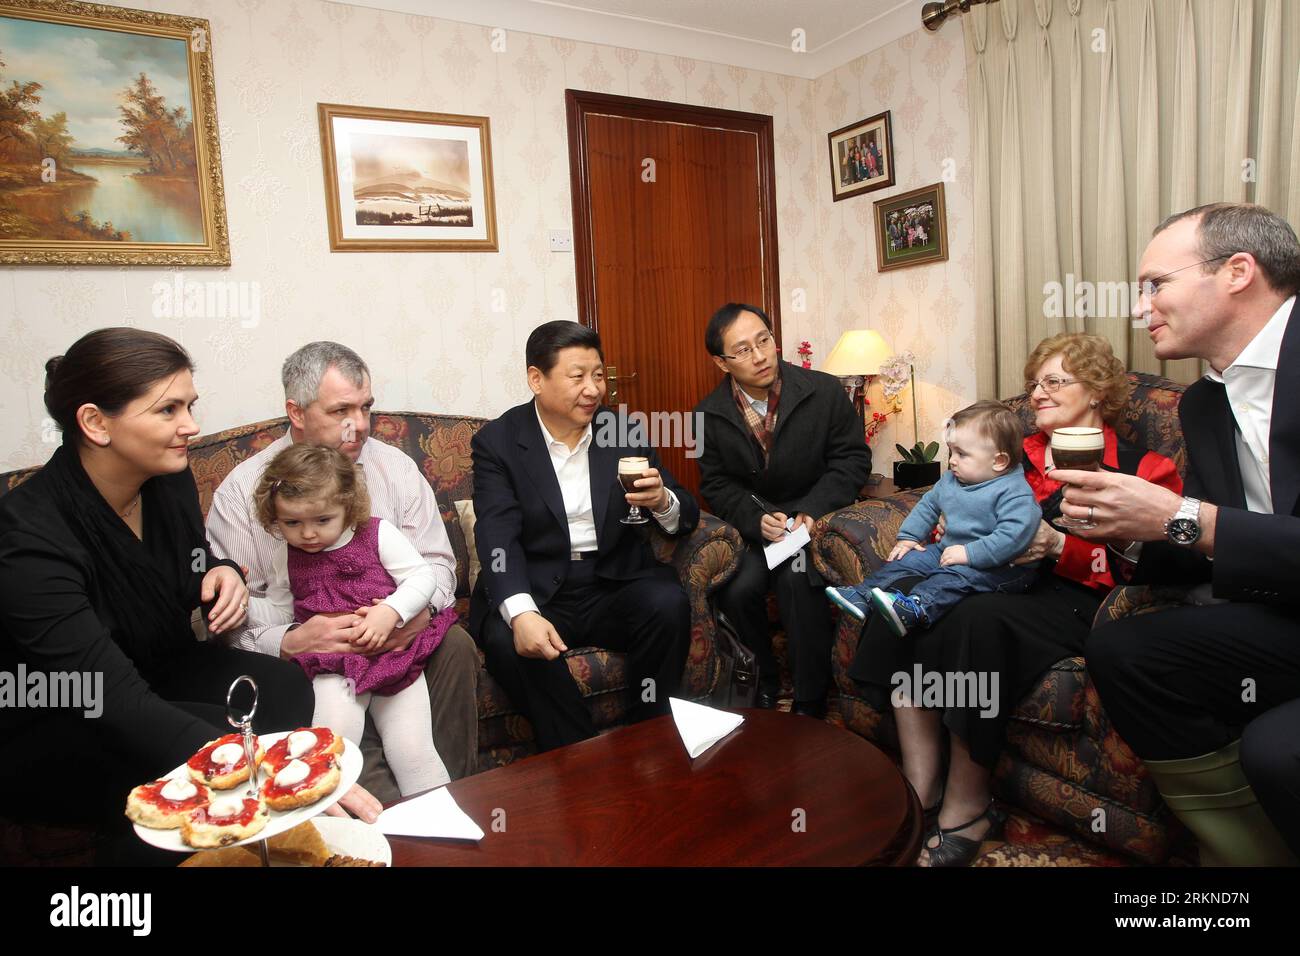 Bildnummer: 57090787  Datum: 19.02.2012  Copyright: imago/Xinhua (120219) -- SHANNON, Feb. 19, 2012 (Xinhua) -- Chinese Vice President Xi Jinping (3rd L) chats with James Lynch s family and tastes an Irish coffee in Shannon, Ireland, Feb. 19, 2012. Xi Jinping visited James Lynch s farm in a suburb of Shannon on Sunday. (Xinhua/Lan Hongguang) (zkr) IRELAND-CHINA-XI JINPING-FARM-VISIT PUBLICATIONxNOTxINxCHN People Politik xbs x0x 2012 quer premiumd      57090787 Date 19 02 2012 Copyright Imago XINHUA  Shannon Feb 19 2012 XINHUA Chinese Vice President Xi Jinping 3rd l Chats With James Lynch S Fam Stock Photo